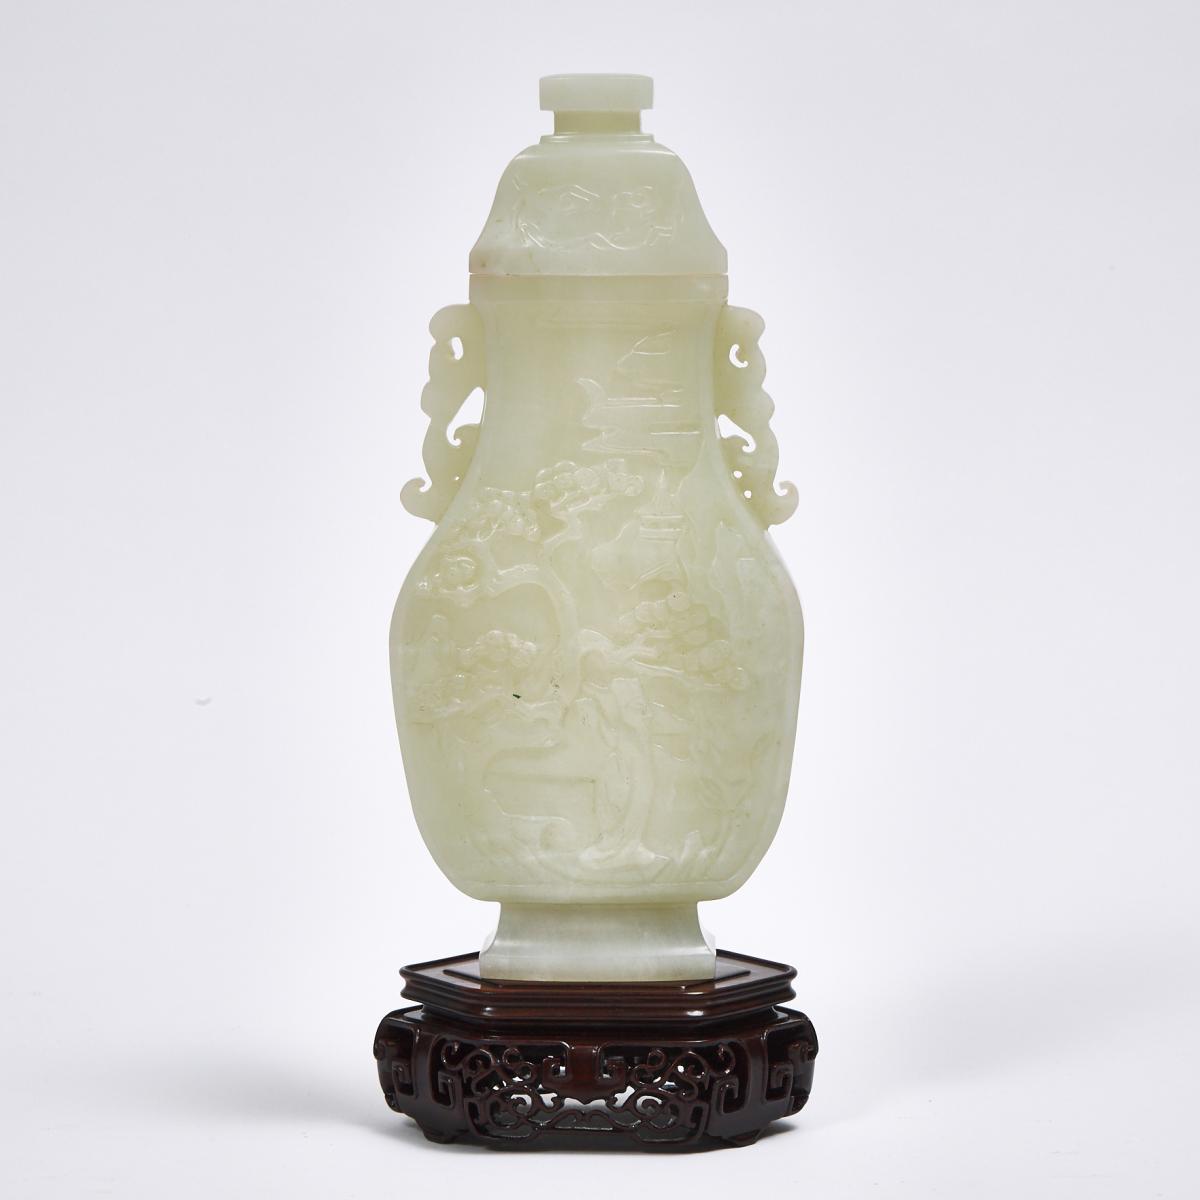 A White Jade 'Scholar and Pine' Vase and Cover, Qing Dynasty, 清 白玉雕'松下高士'紋瓶, height 9.6 in — 24.3 cm